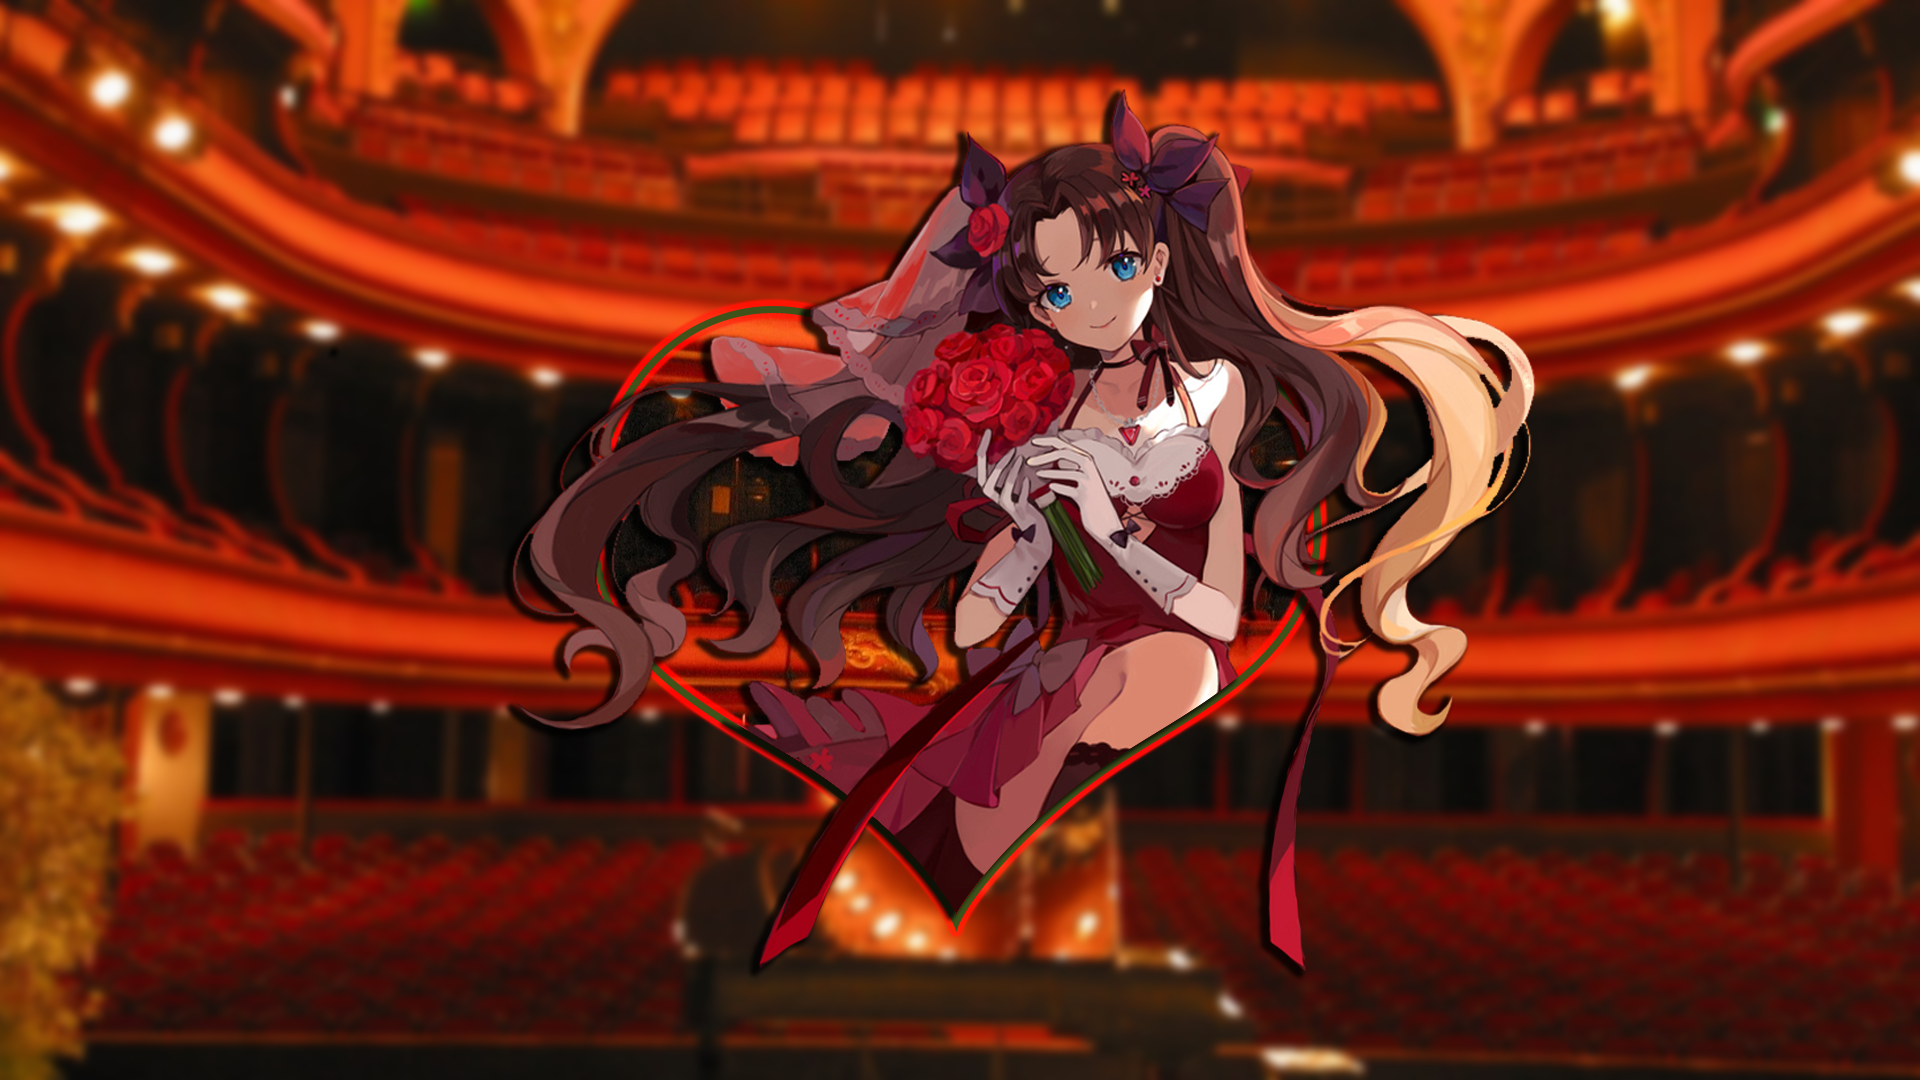 Anime 1920x1080 Tohsaka Rin concert hall rose Fate series picture-in-picture